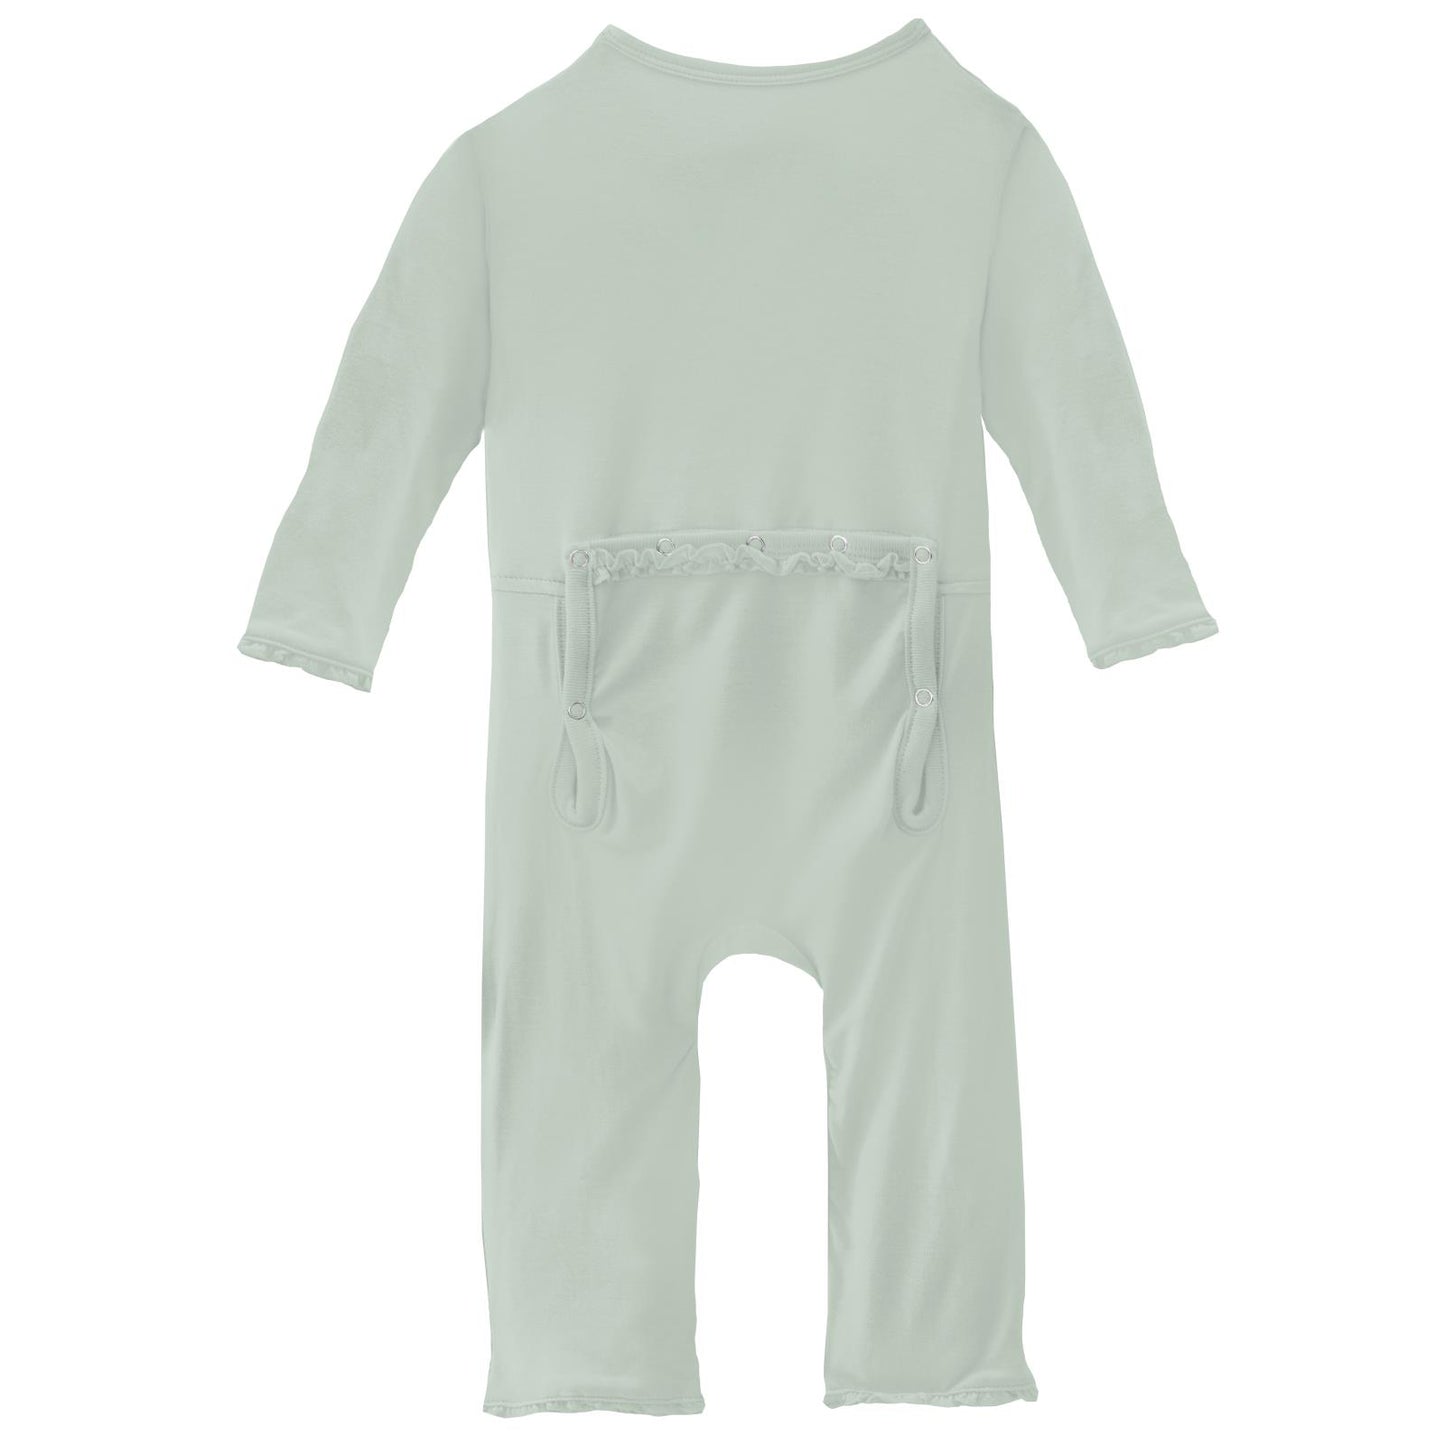 Muffin Ruffle Coverall with Zipper